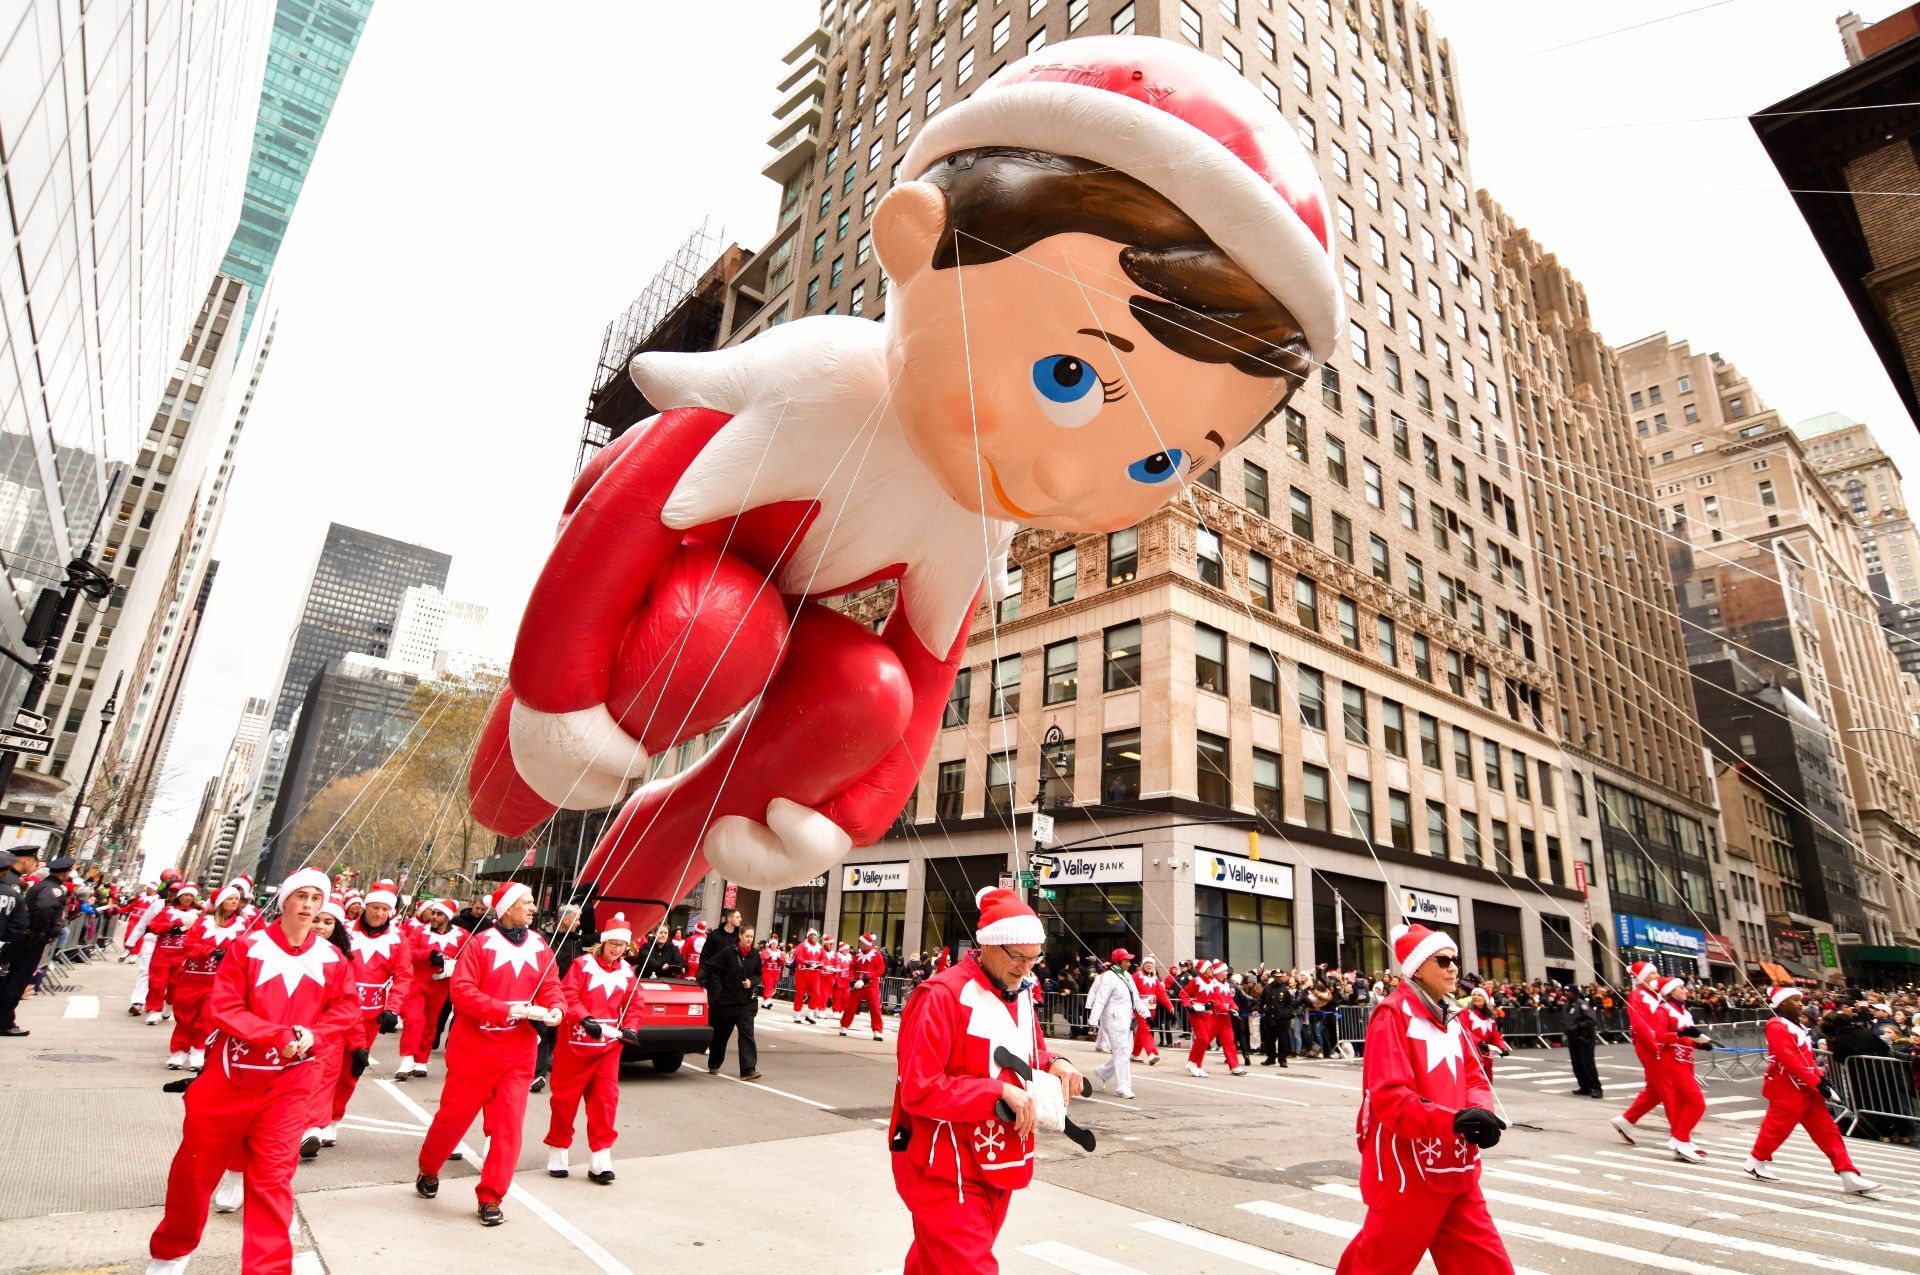 Netflix Announces Elf on the Shelf Series and Film Projects